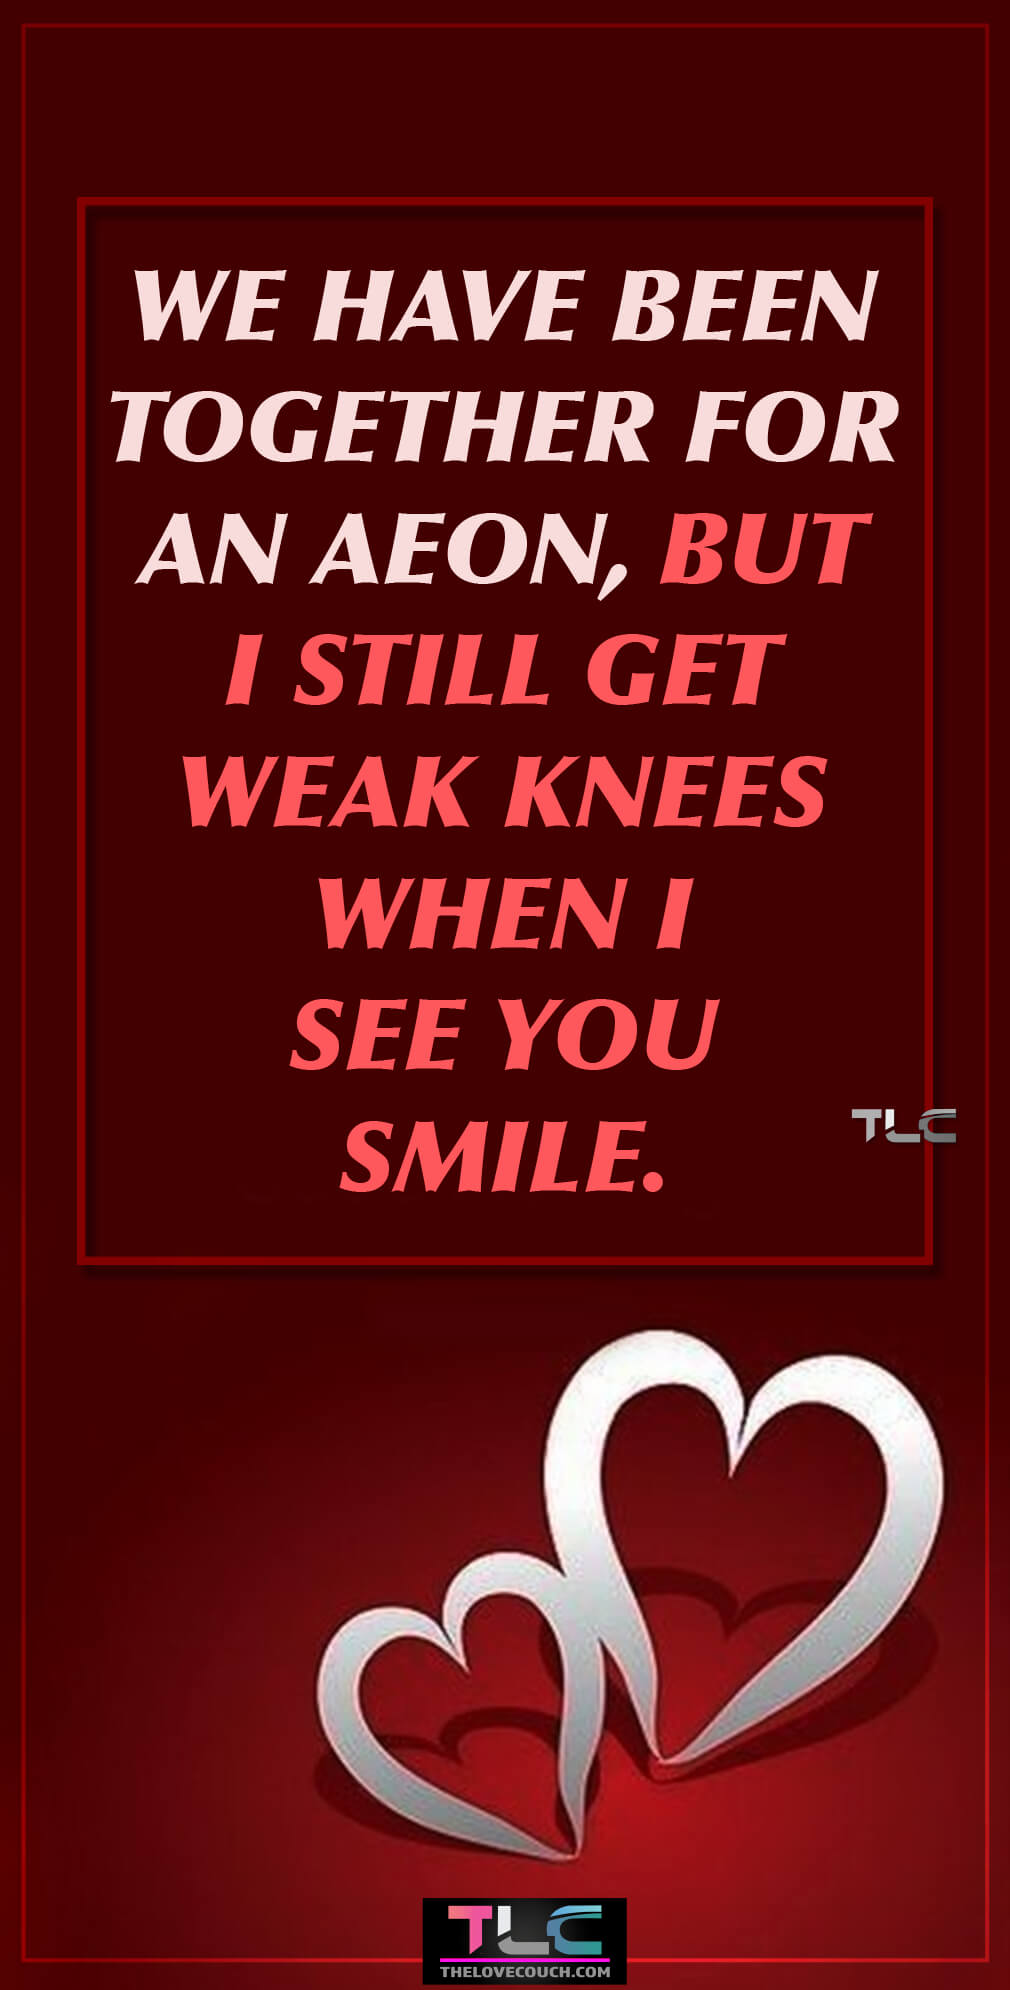 We have been together for a aeon, but I still get weak knees when I see you smile. Want to express what's in your heart to your boyfriend or husband through some flirty text messages? Here's a collection of some amazing cute and sweet flirty texts for him that you can use to let him know what you're thinking. Get more of the best flirty text messages, sweets texts for him, and some subtle flirty texts for him. Also find amazing cute flirty texts for him as well as those hot, funny, and sweet flirty texts for him to make him go crazy for you!